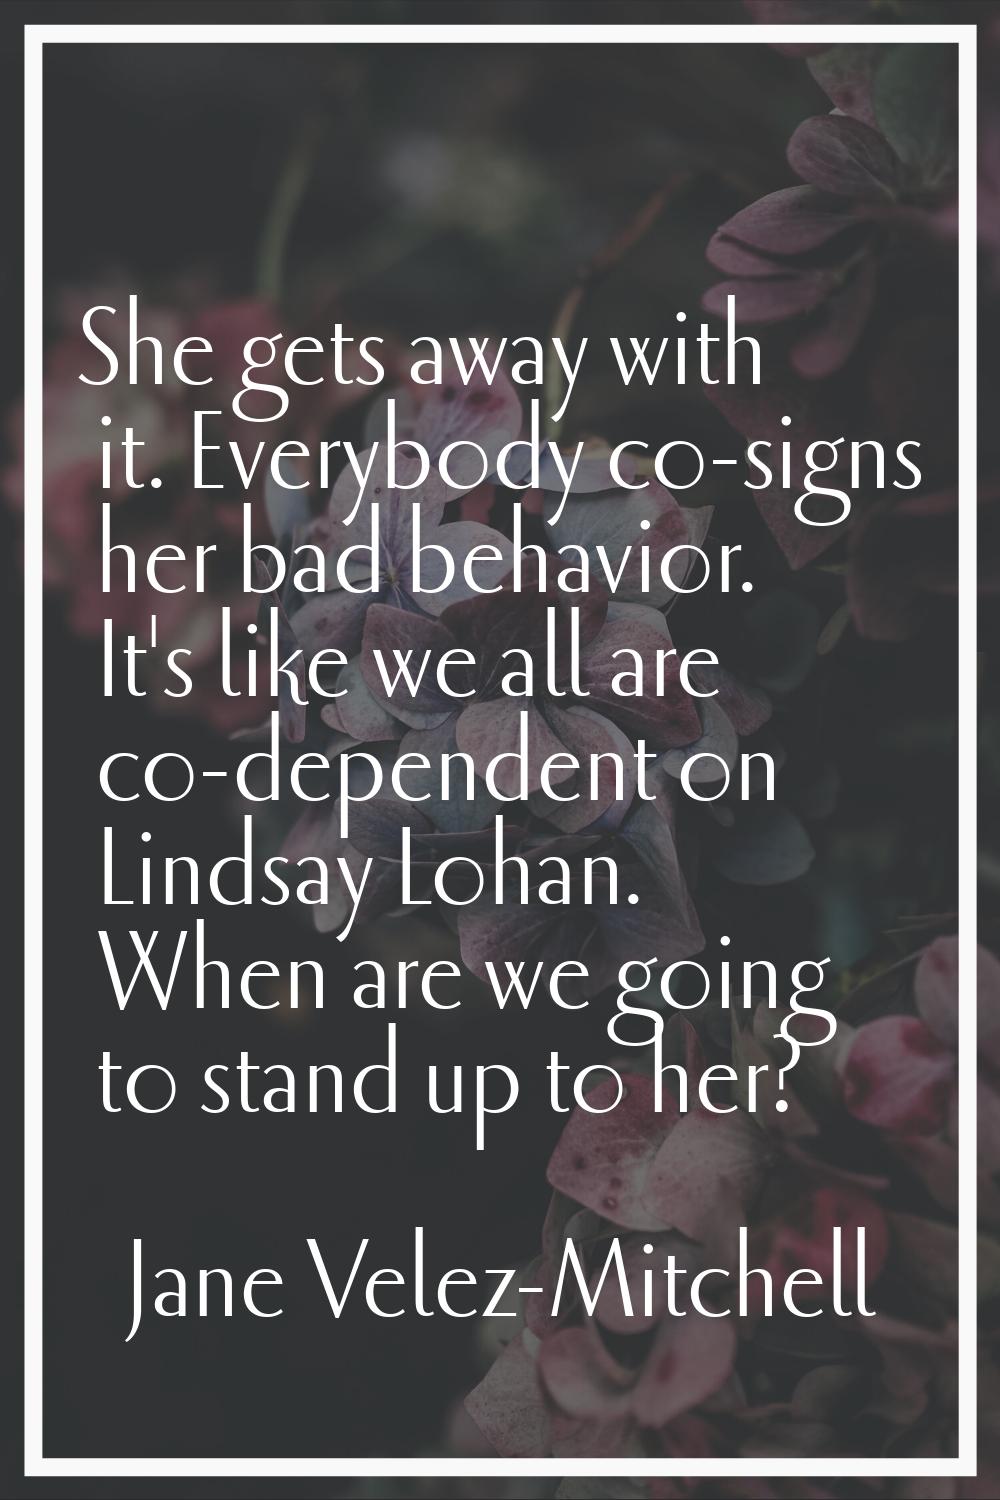 She gets away with it. Everybody co-signs her bad behavior. It's like we all are co-dependent on Li